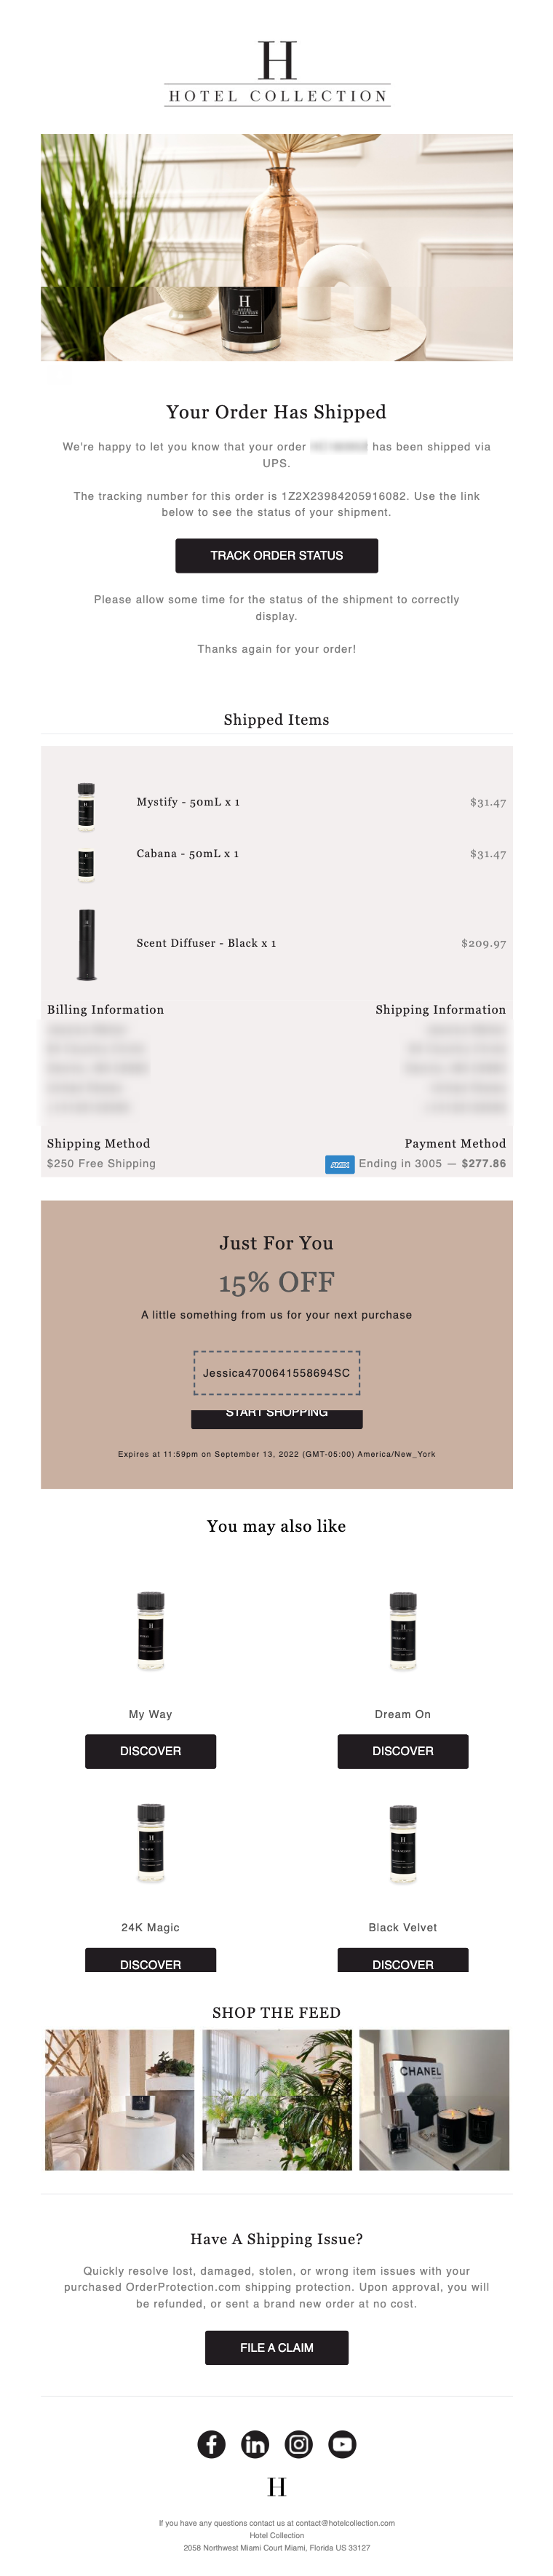 Hotel Collection Shipment Created Home Goods Email Template 